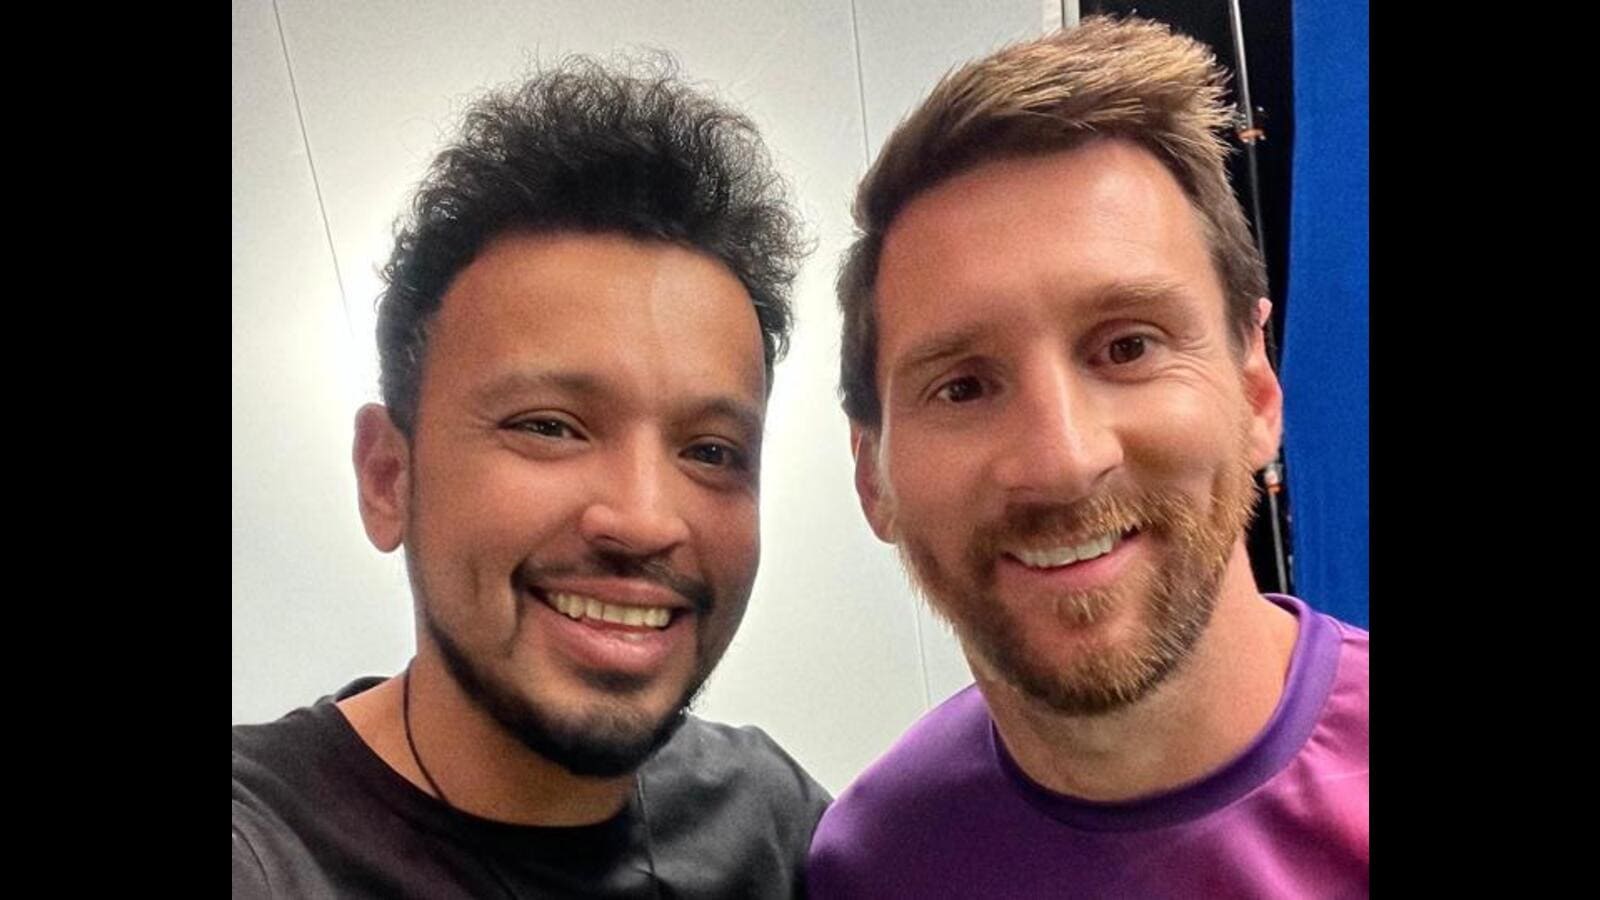 Rohan Shrestha on his shoot with Leo Messi: After the shoot he came back and hugged me; I wept